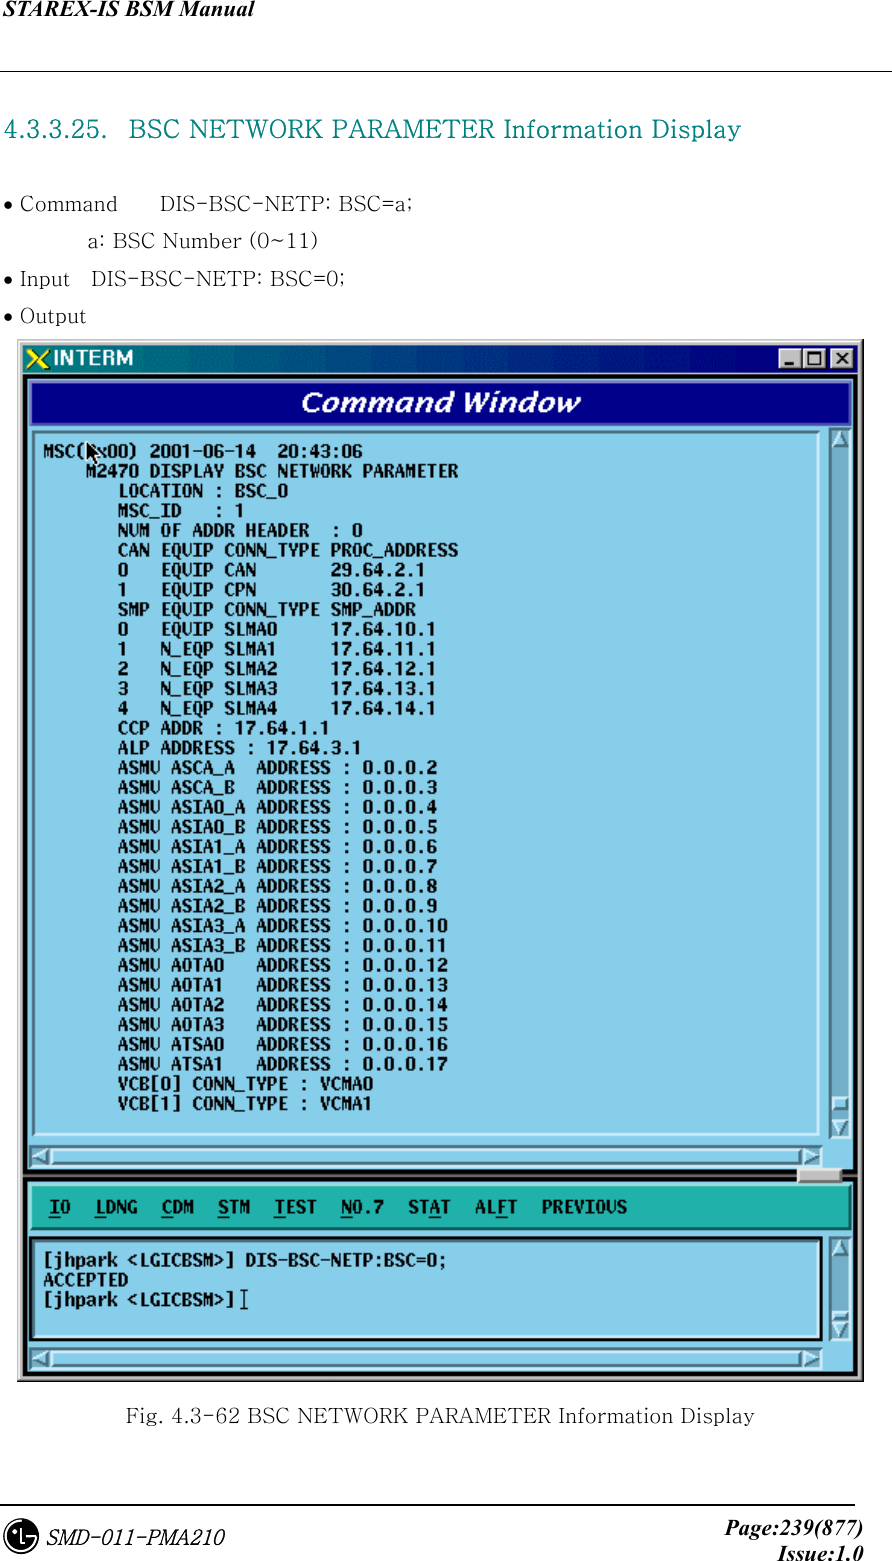 STAREX-IS BSM Manual     Page:239(877)Issue:1.0SMD-011-PMA210  4.3.3.25.   BSC NETWORK PARAMETER Information Display  • Command    DIS-BSC-NETP: BSC=a;         a: BSC Number (0~11) • Input    DIS-BSC-NETP: BSC=0; • Output  Fig. 4.3-62 BSC NETWORK PARAMETER Information Display 